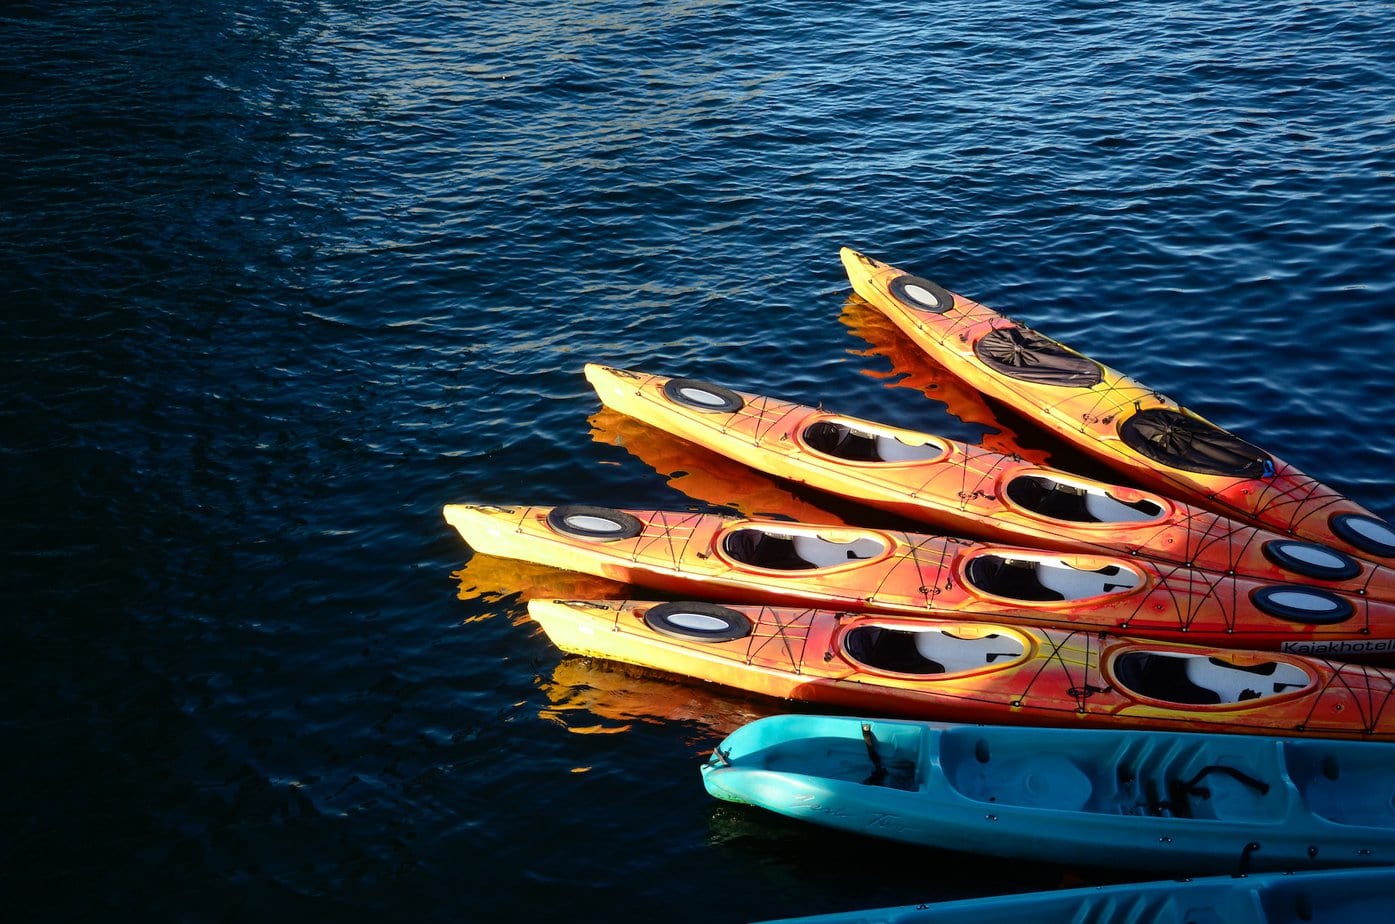 Extending the Lifespan of Your Kayak: The Benefits of a Dock Storage Rack